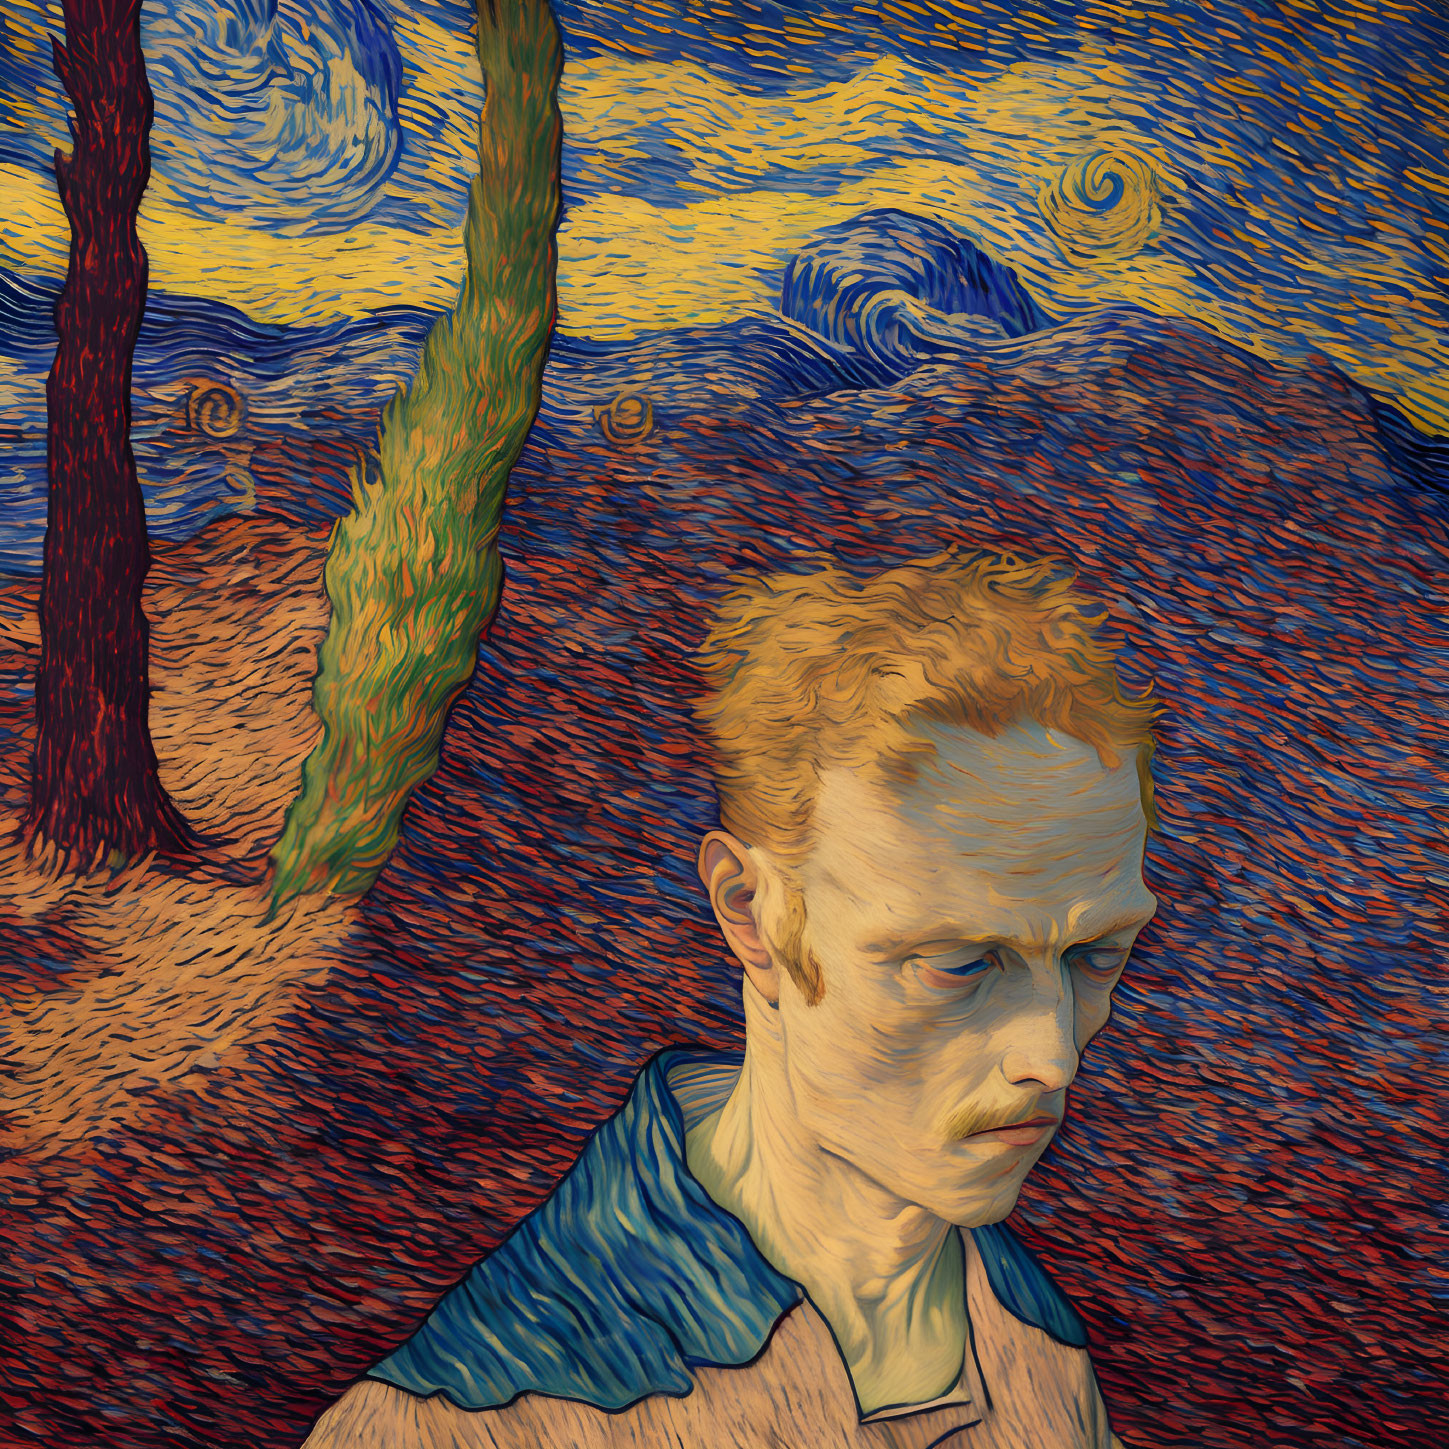 Reddish-haired person in solemn expression against vibrant starry night backdrop